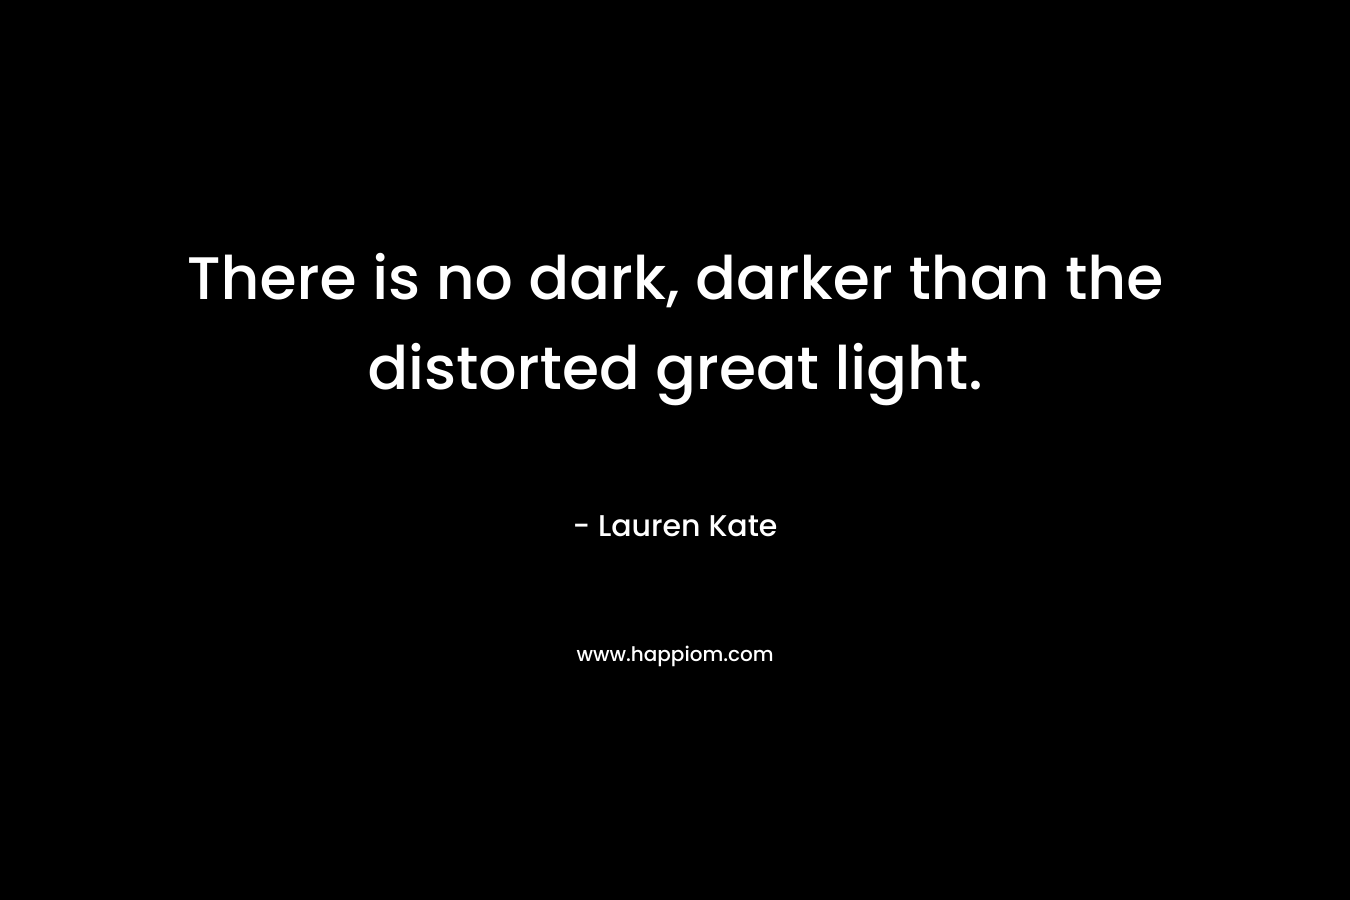 There is no dark, darker than the distorted great light.